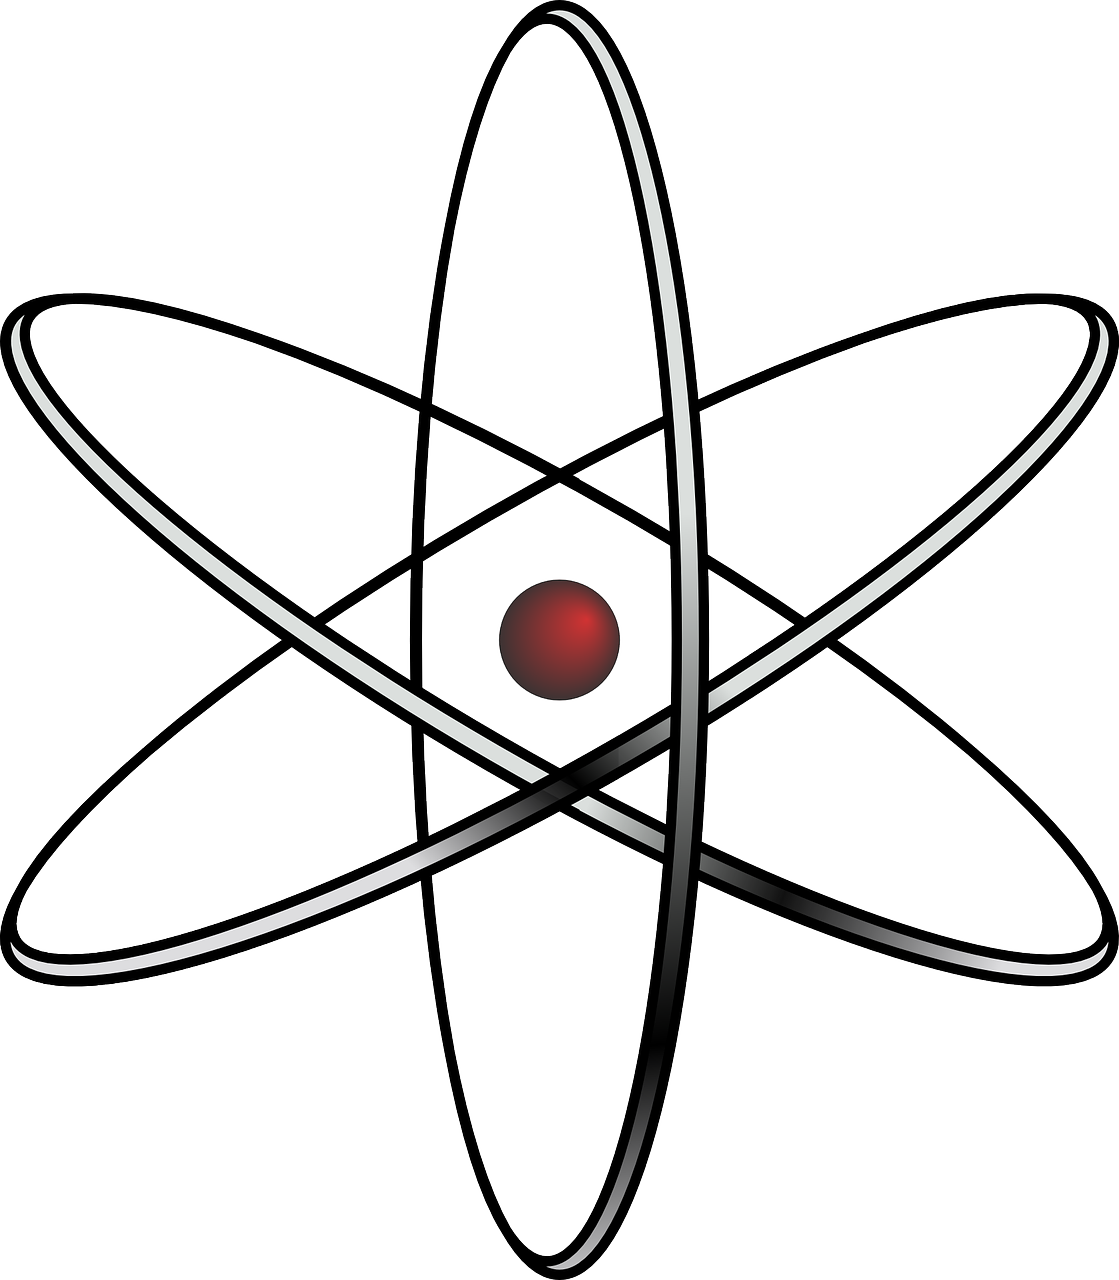 A Red Ball In The Middle Of A Black Background